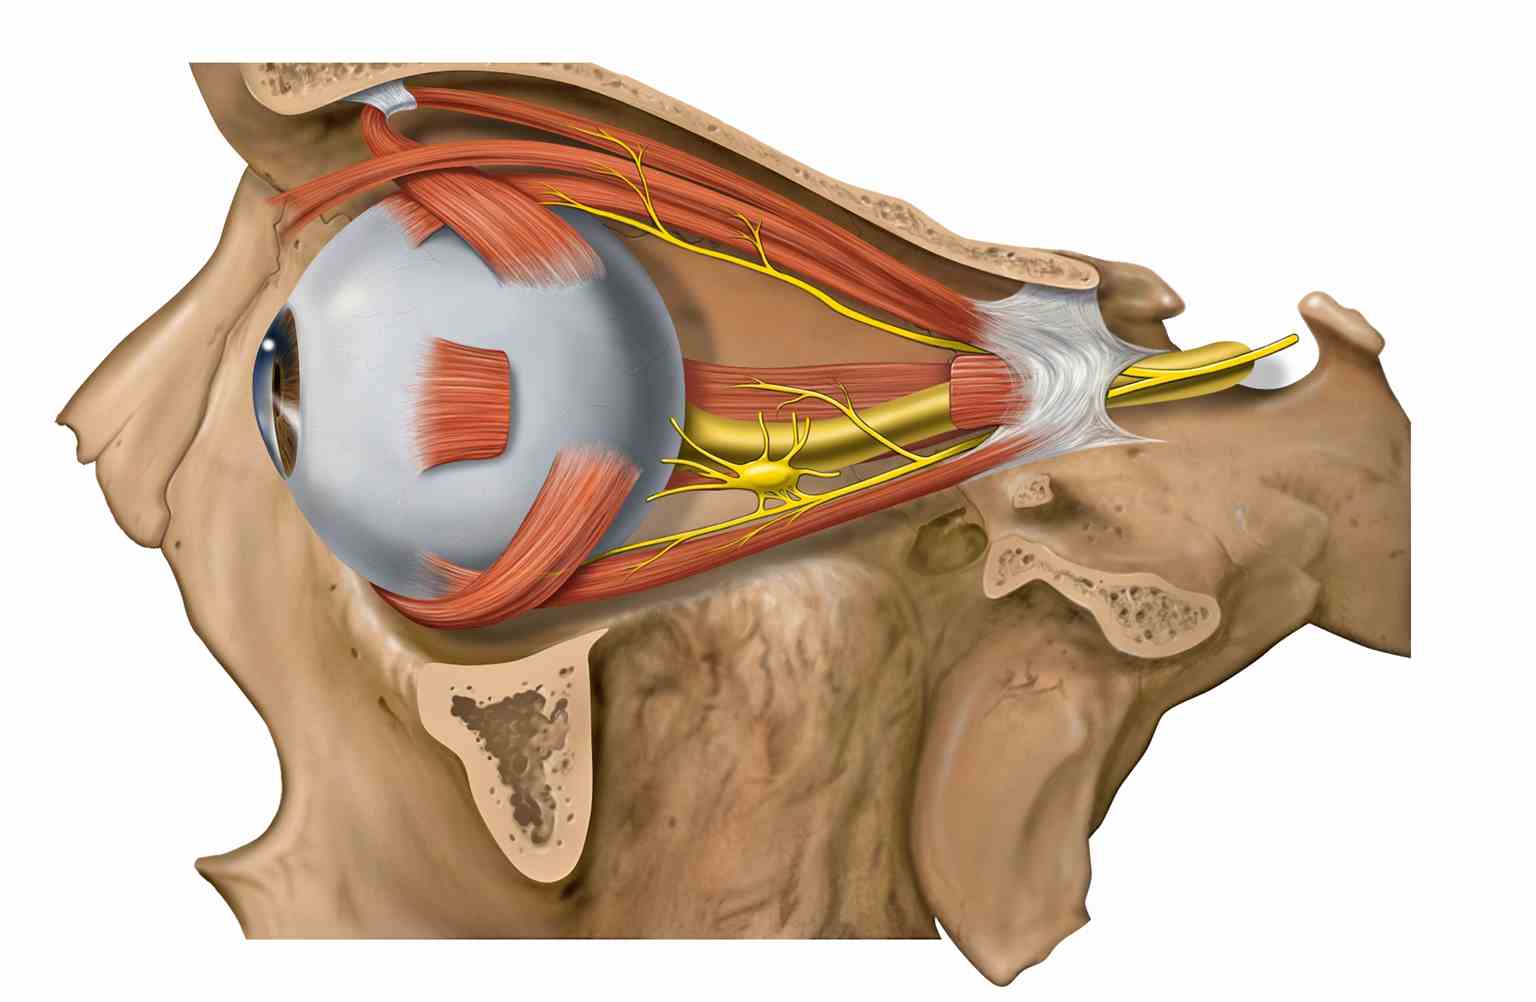 Lateral eye and orbit anatomy with nerves, Optic Nerve is depicted by yellow color.